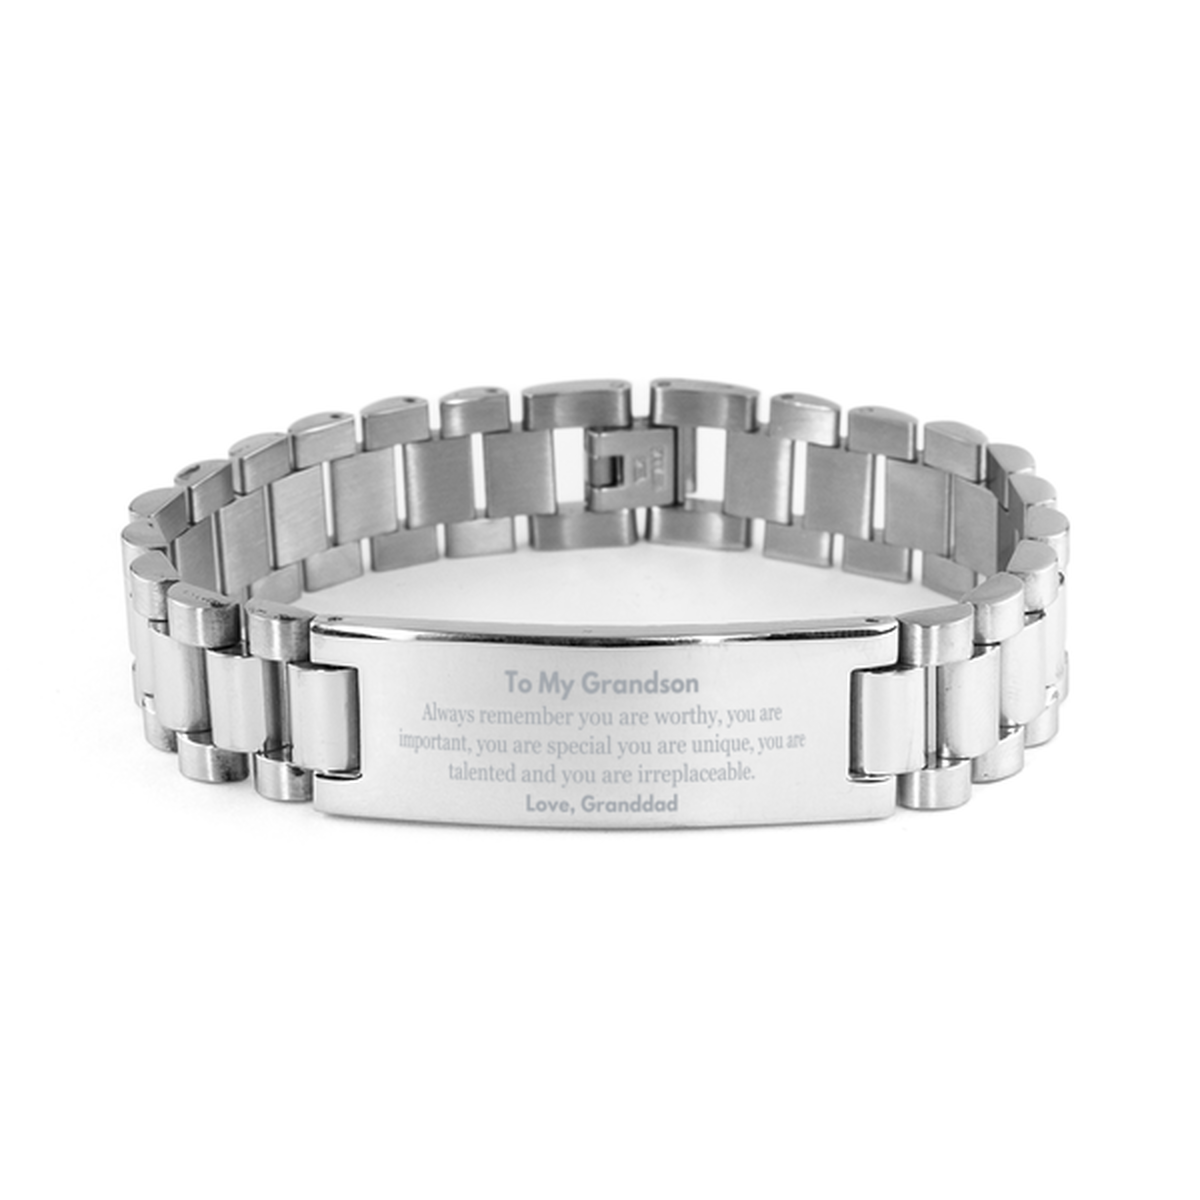 Grandson Birthday Gifts from Granddad, Inspirational Ladder Stainless Steel Bracelet for Grandson Christmas Graduation Gifts for Grandson Always remember you are worthy, you are important. Love, Granddad